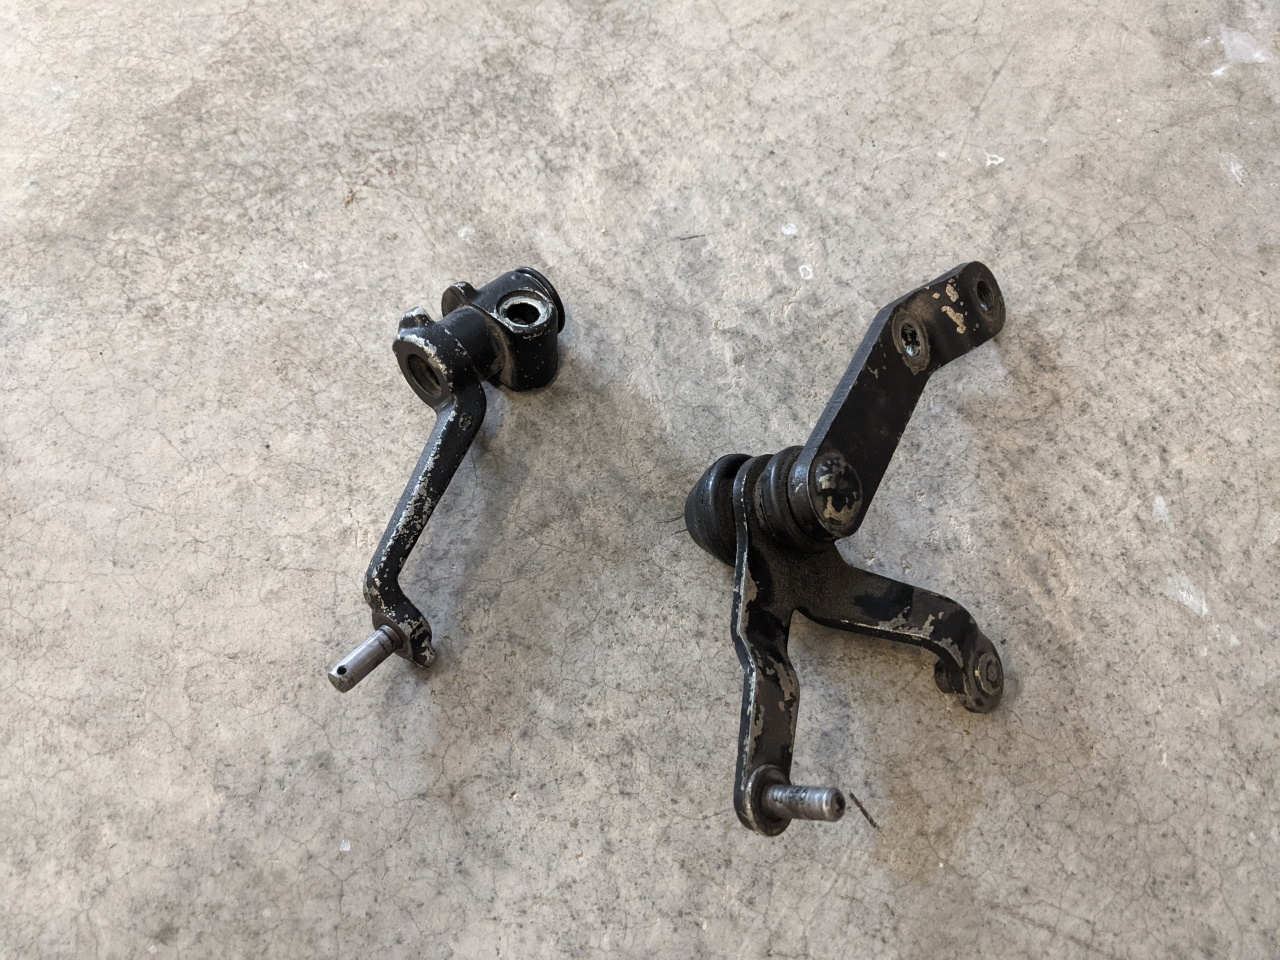 Shift lever and bellcrank